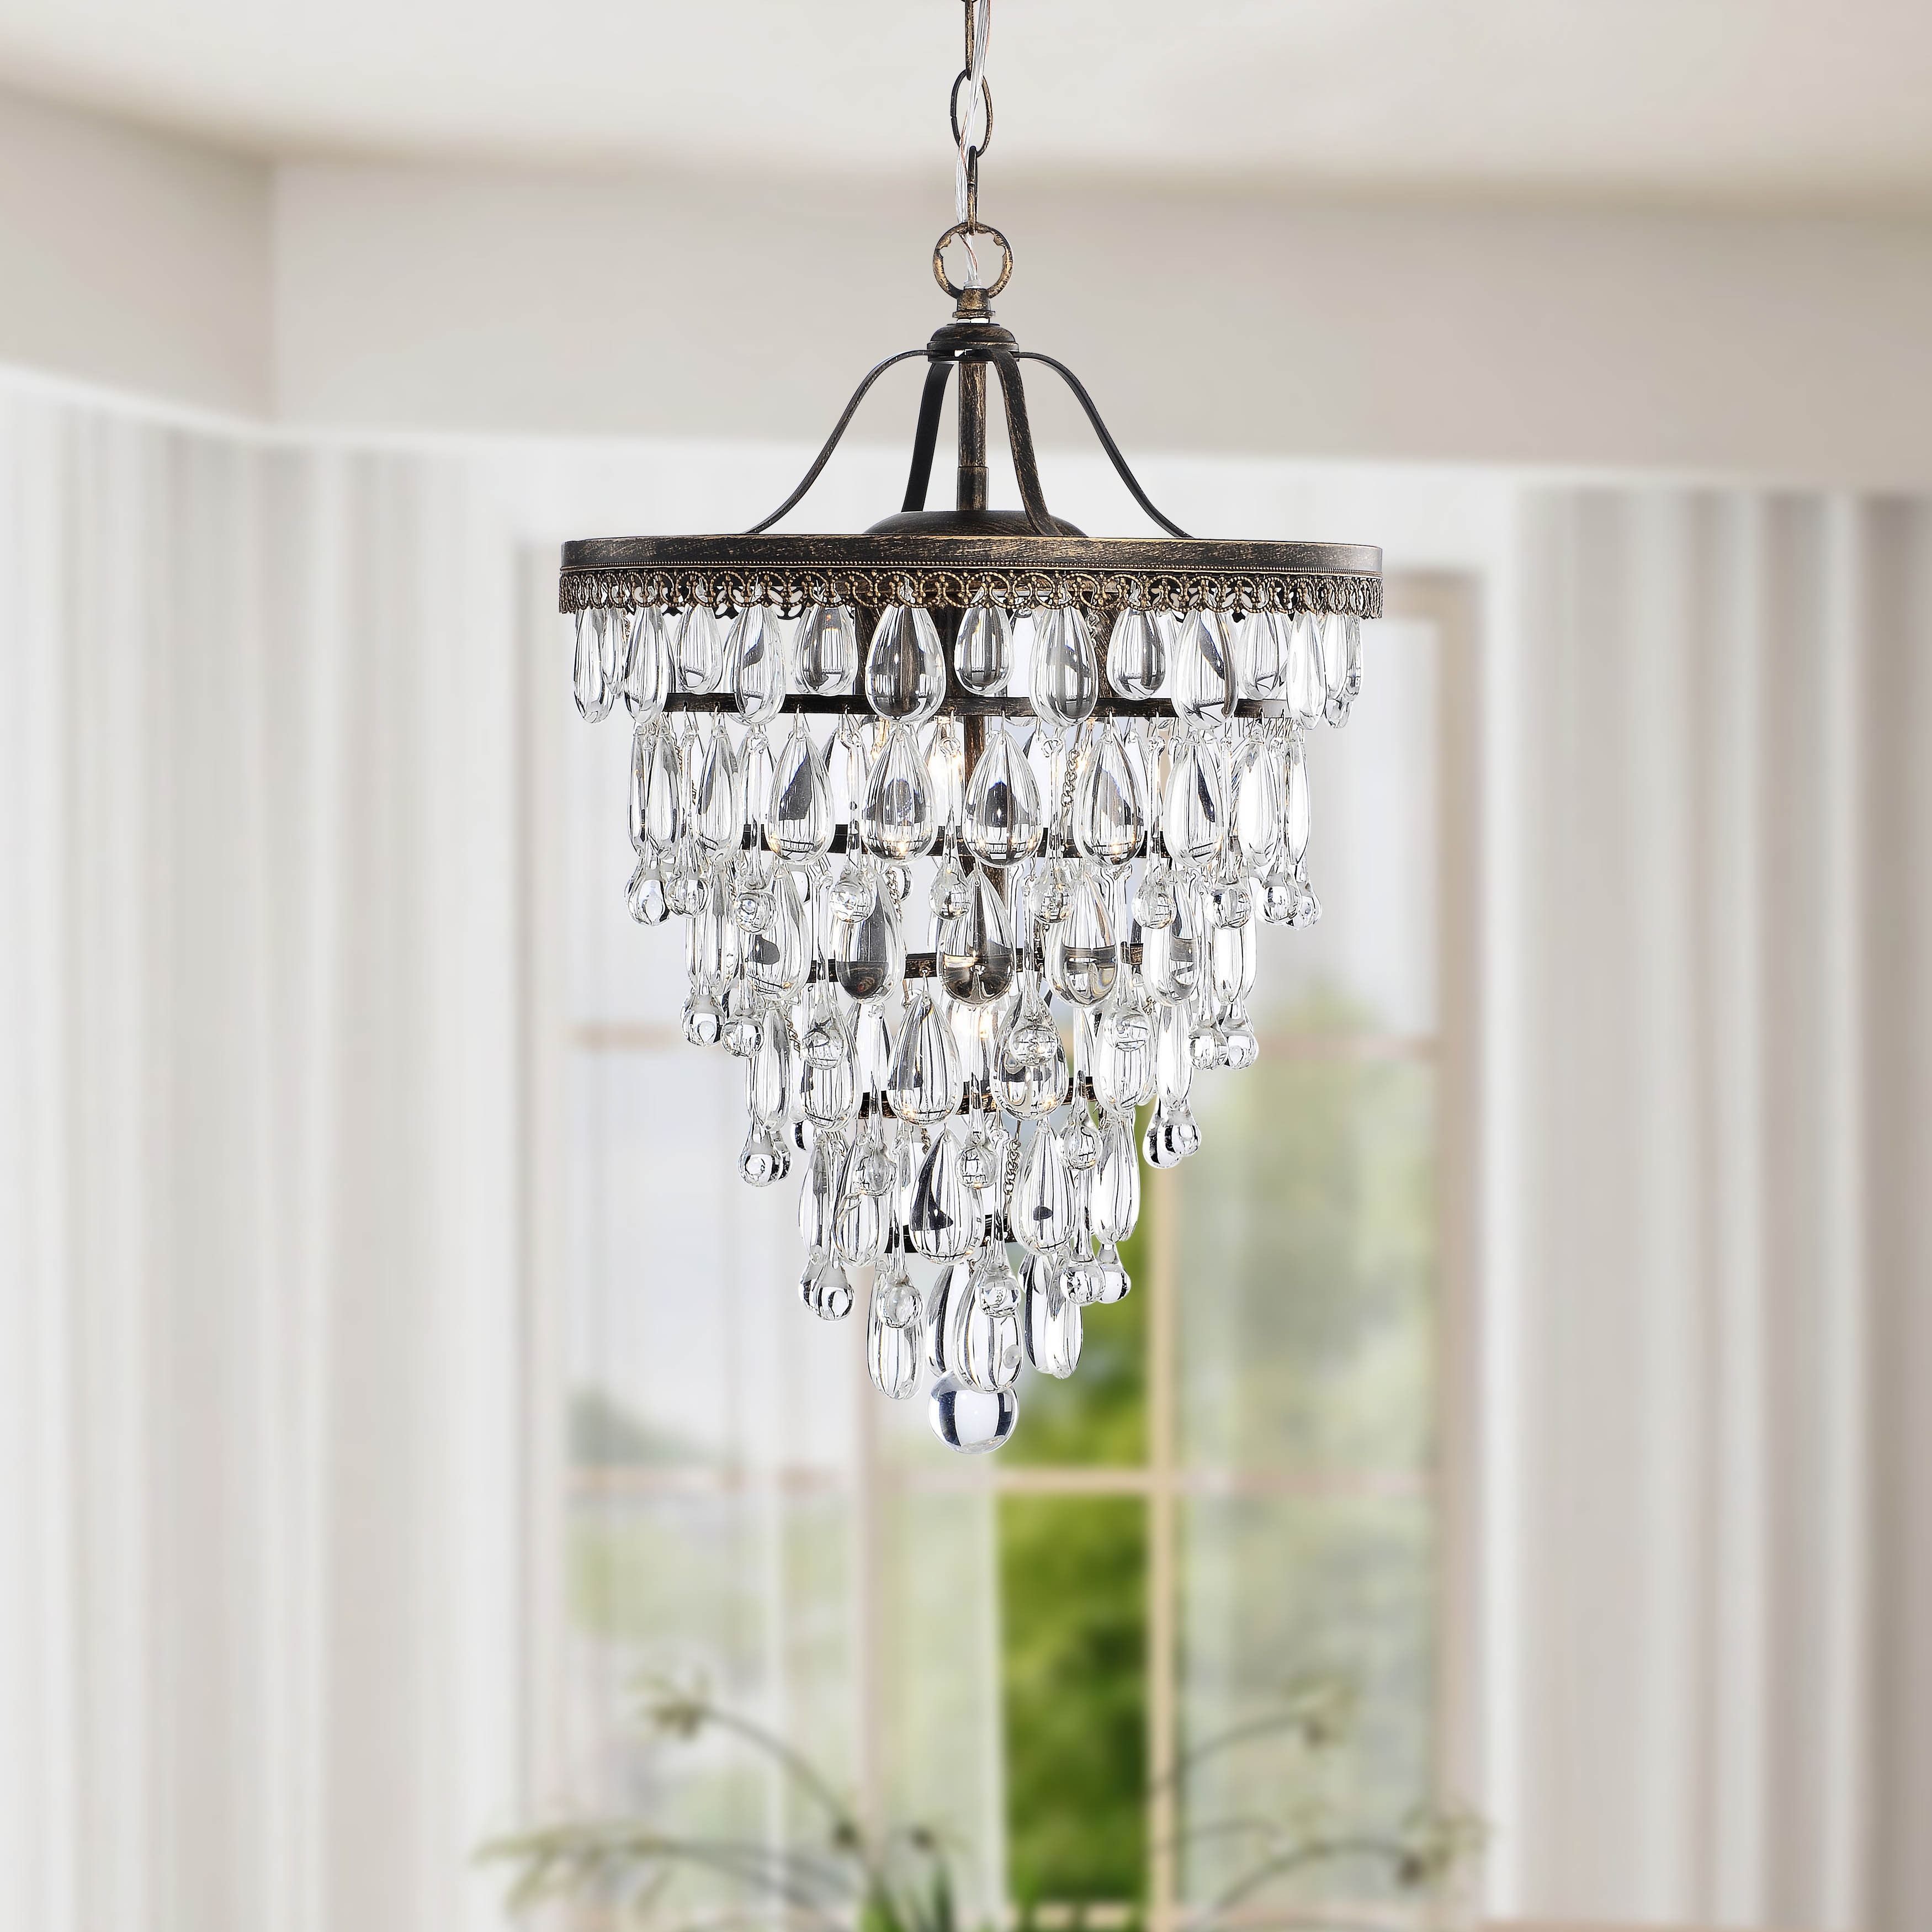 Give Your Home An Elegant Makeover With This Four Light Throughout Verdell 5 Light Crystal Chandeliers (View 16 of 30)